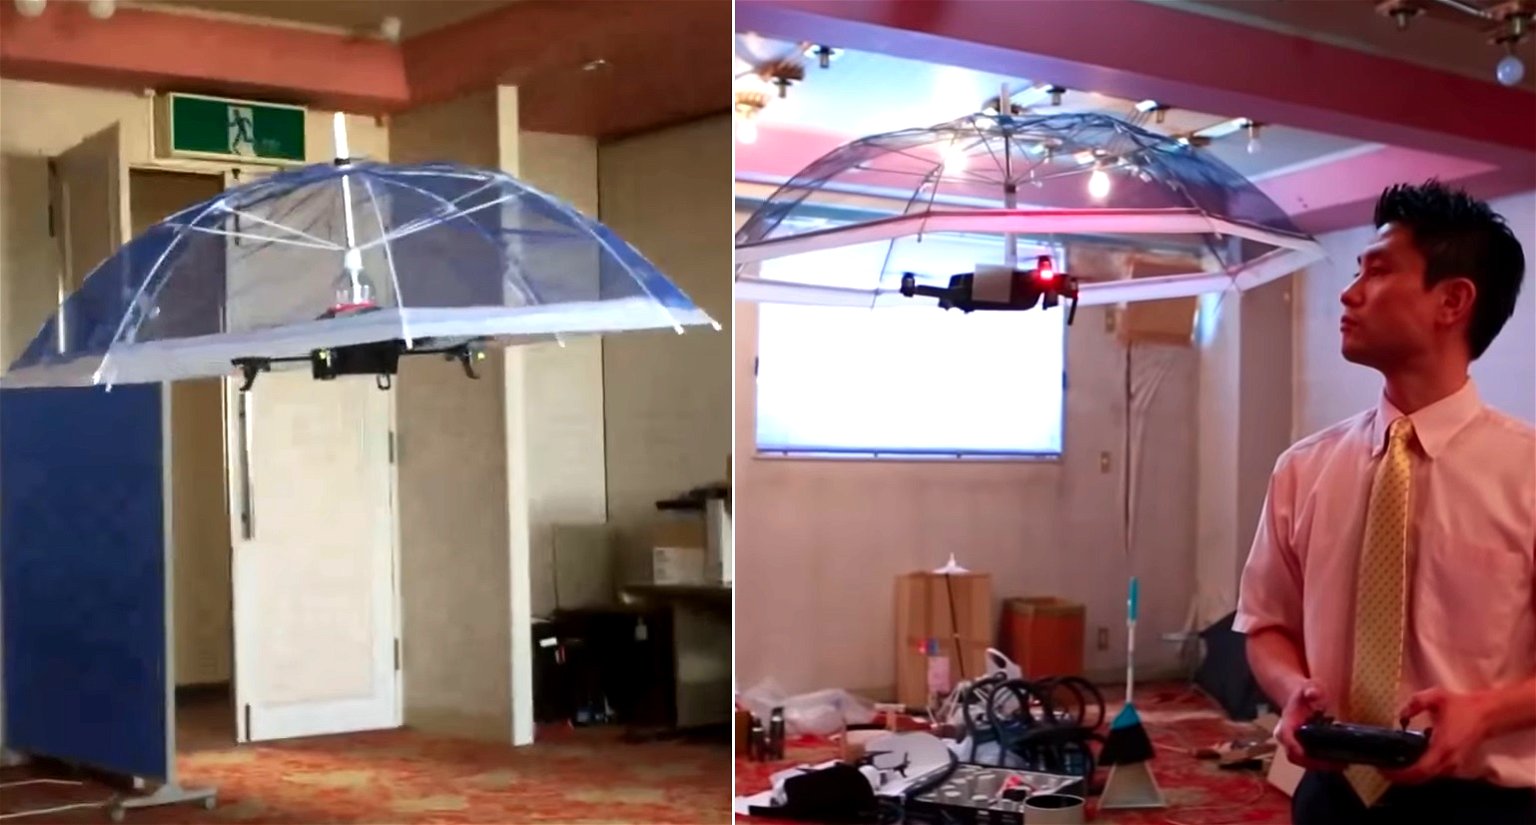 Golf Courses in Japan Will Soon Have AI Drone Umbrellas Floating Over People